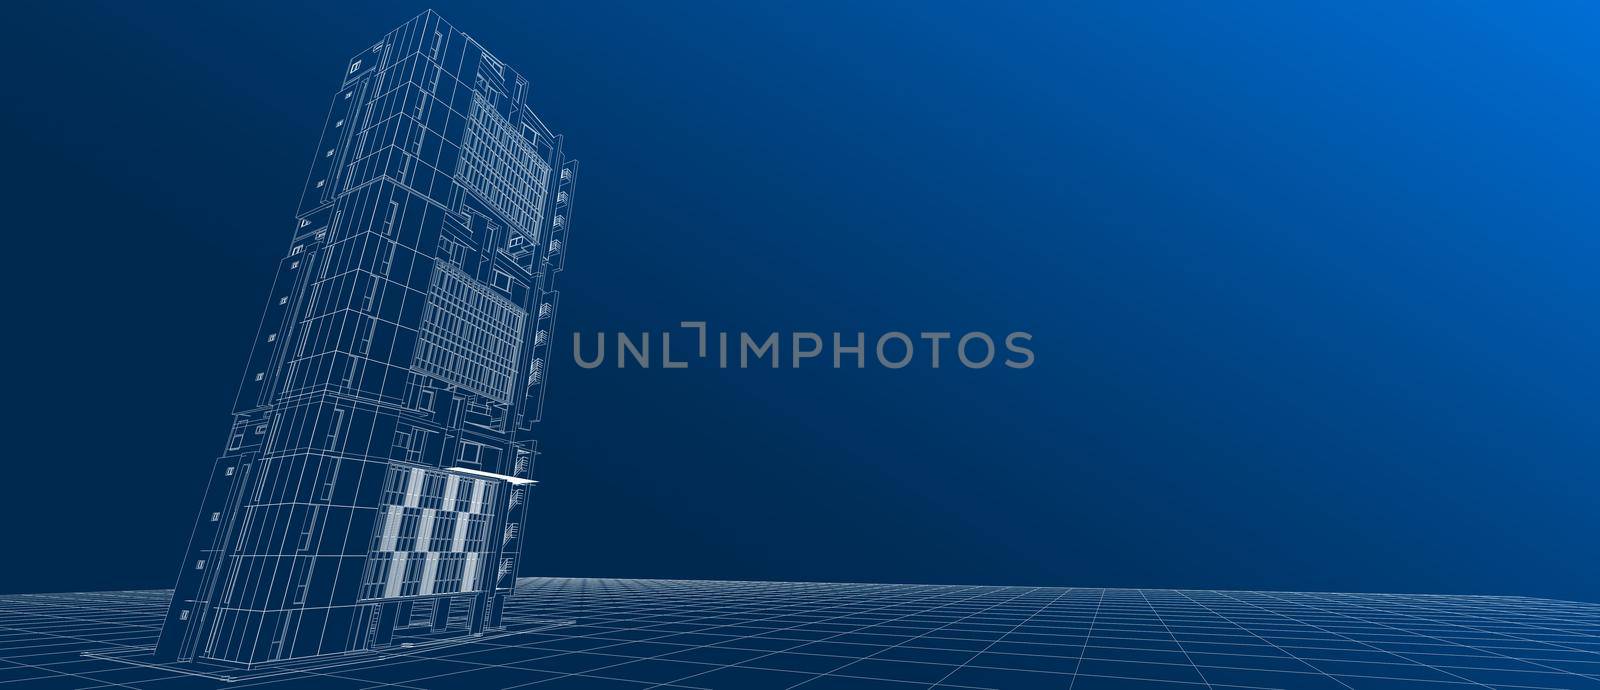 Architecture exterior facade building design concept 3d perspective white wire-frame rendering gradient blue background. For abstract background or wallpaper desktops, architectural theme